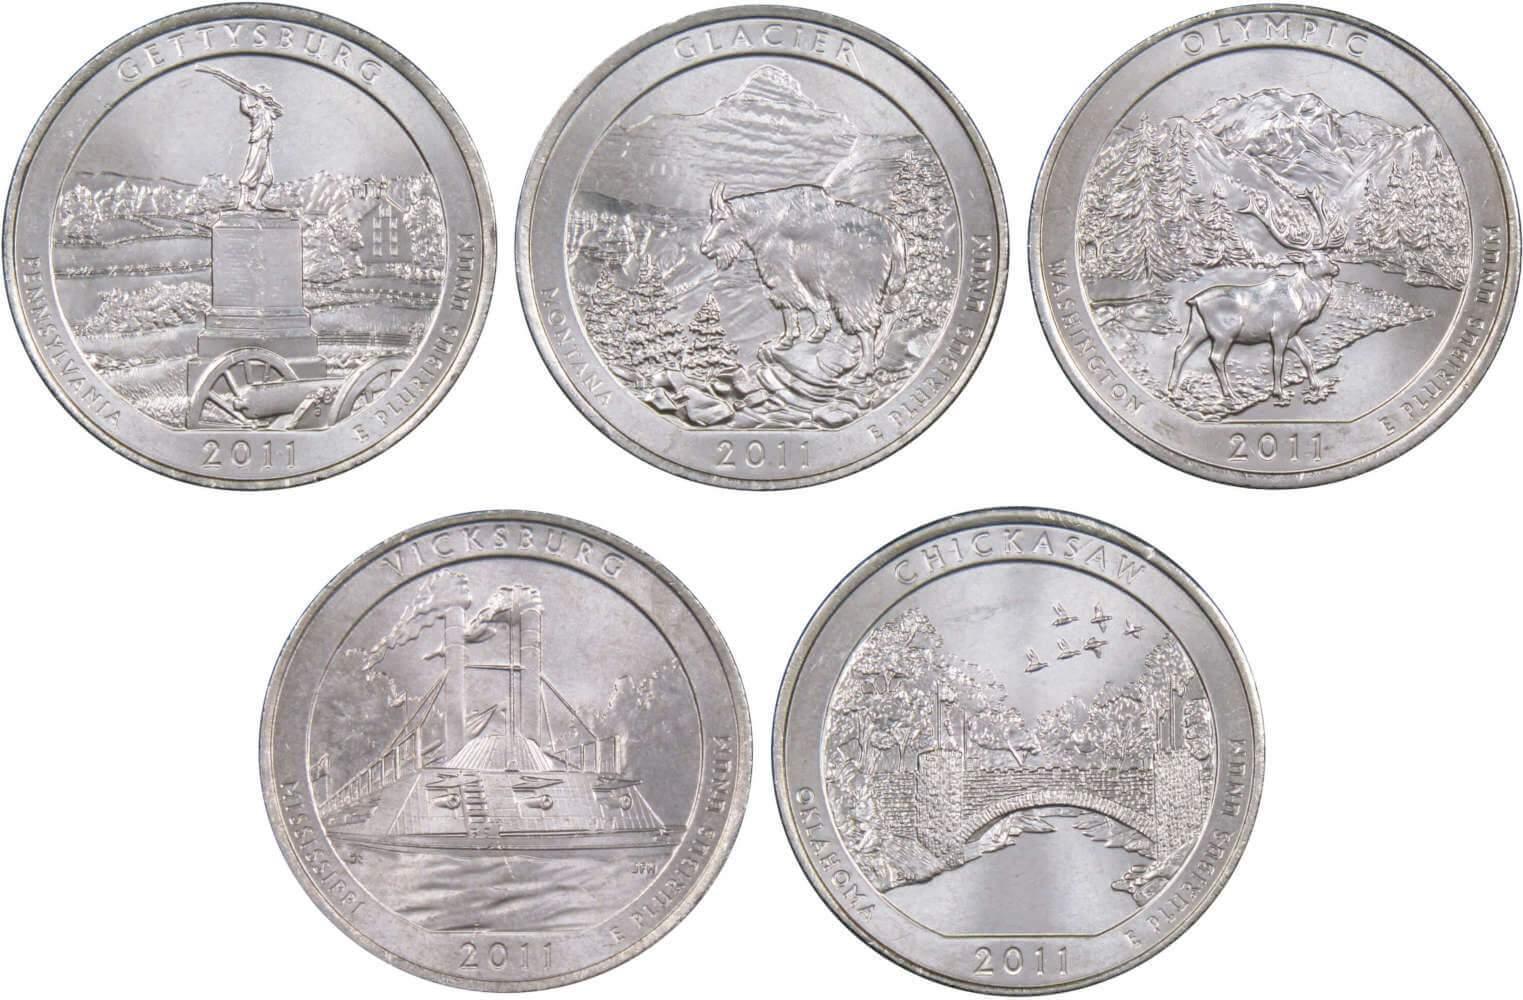 2011 P National Park Quarter 5 Coin Set Uncirculated Mint State 25c Collectible